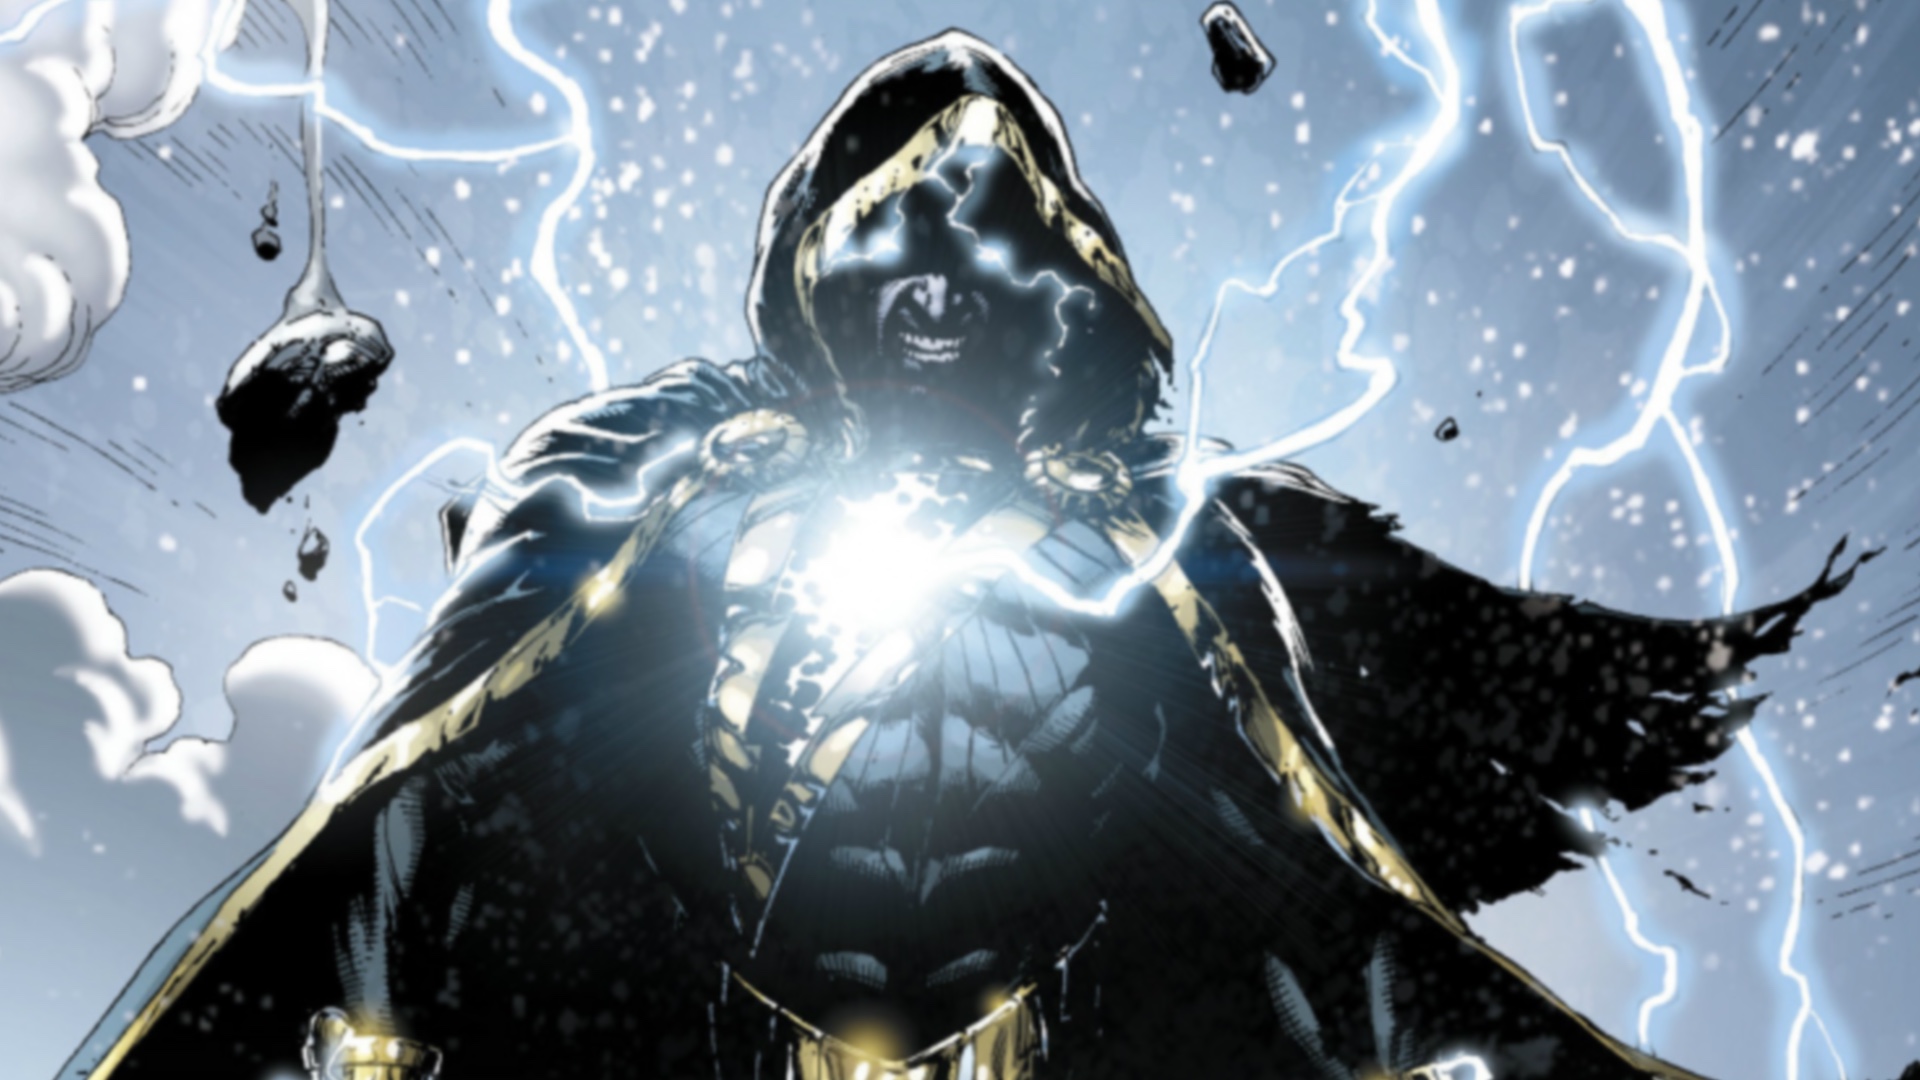 Who is Black Adam and what are his powers?